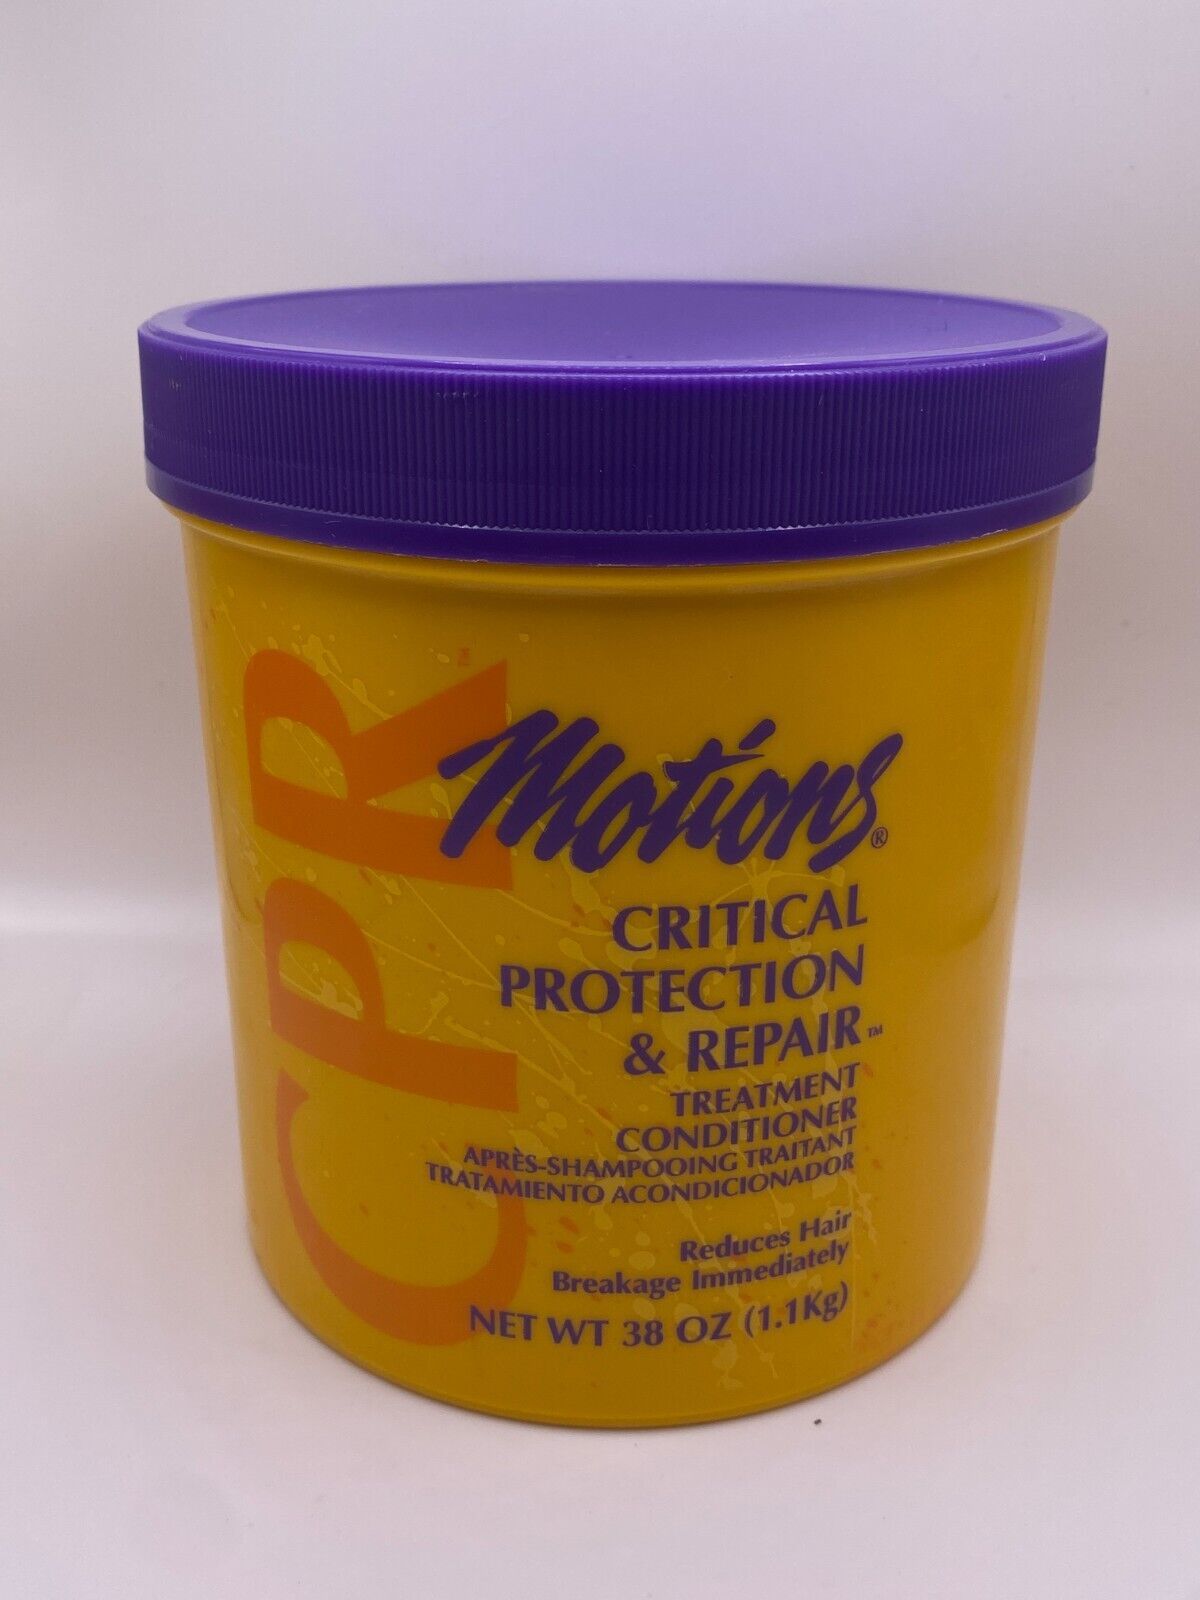 Motions CPR Treatment Conditioner Critical Protection & Repair JUMBO 38 oz NEW - $89.99